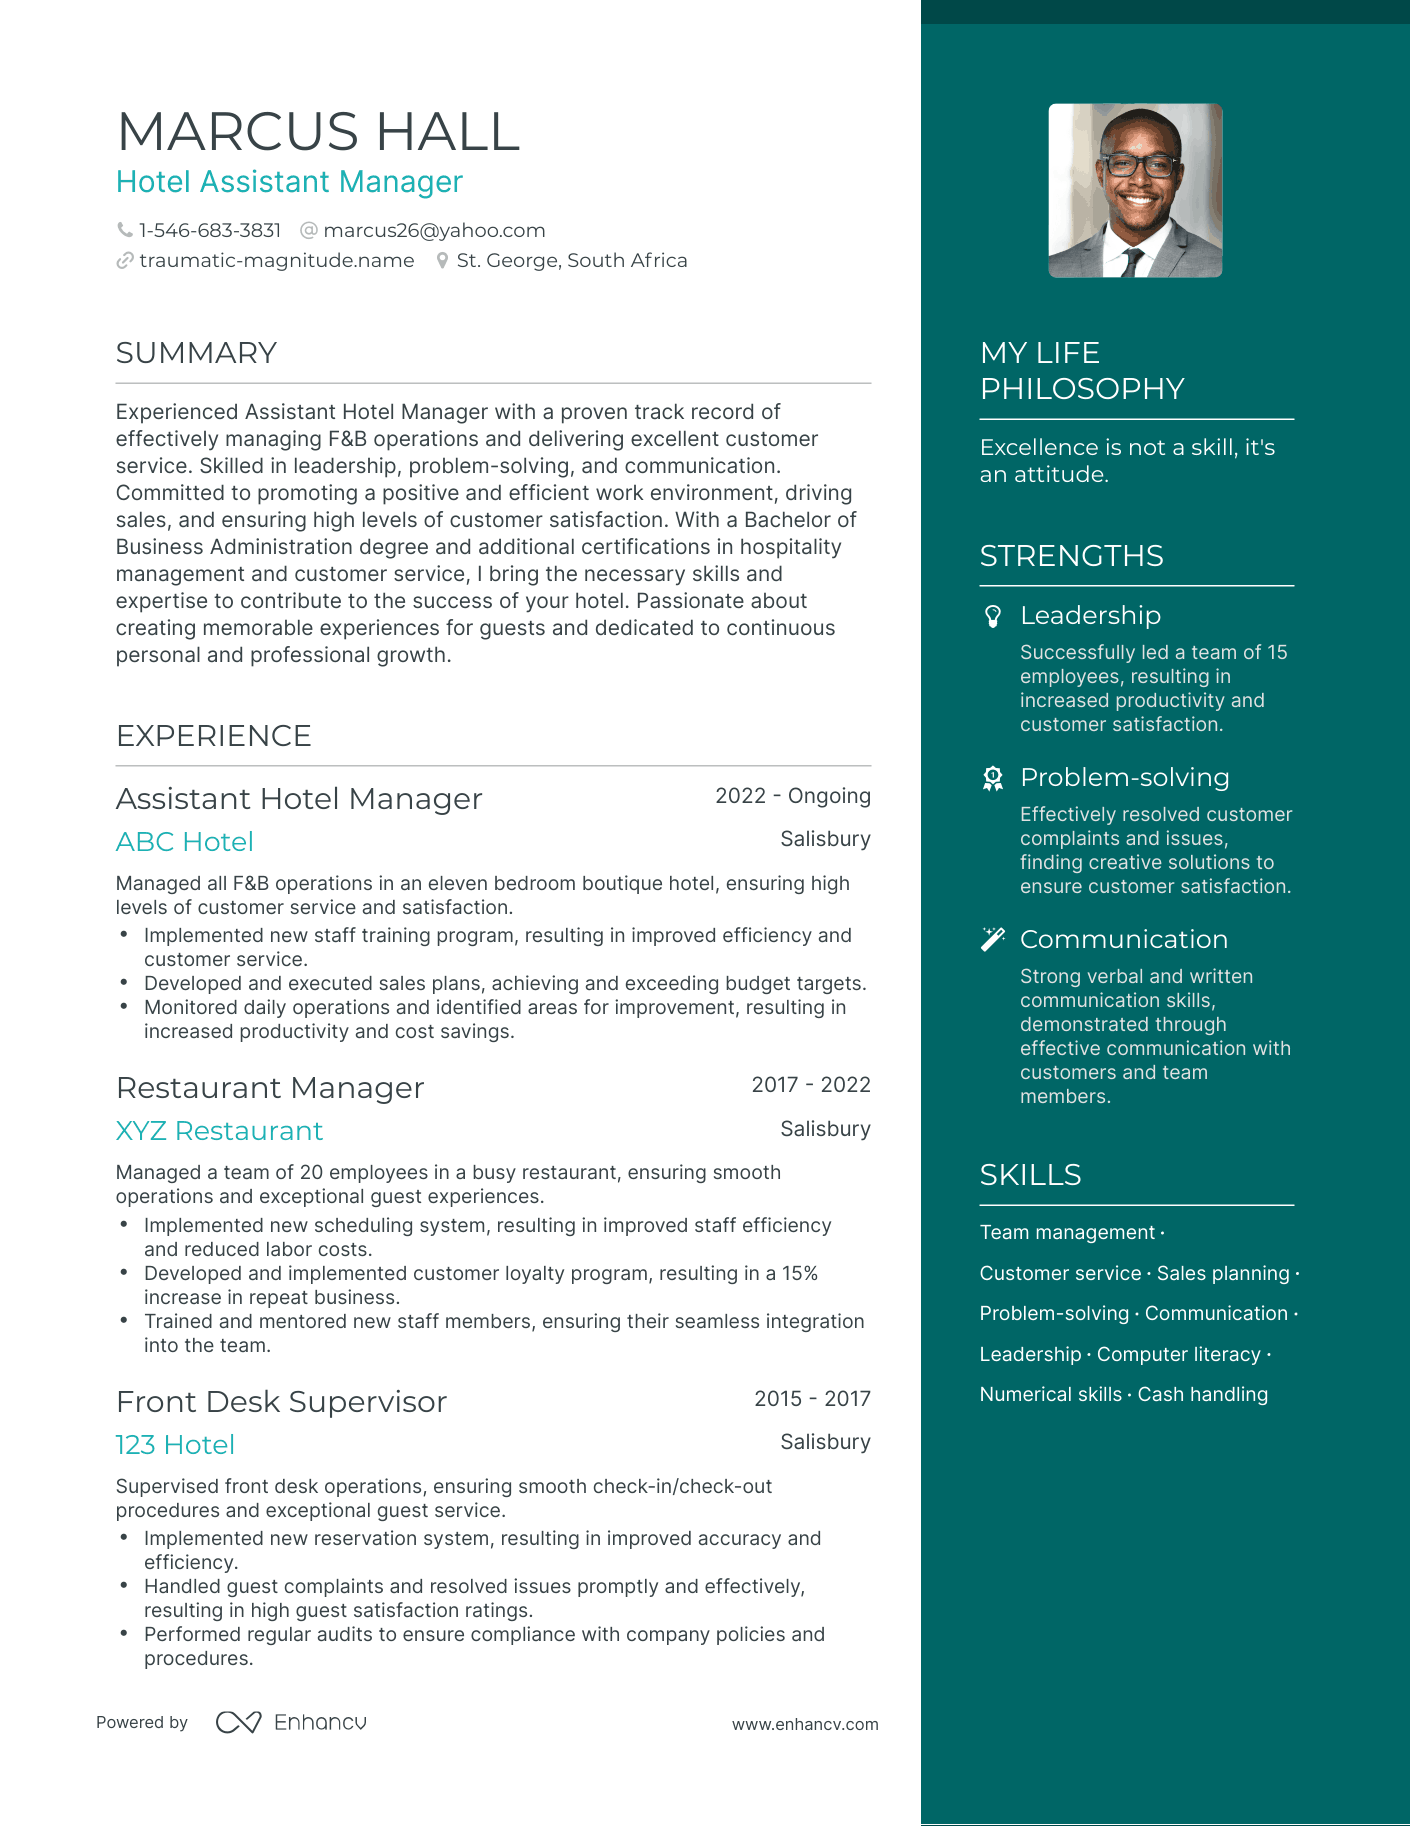 Hotel Assistant Manager resume example